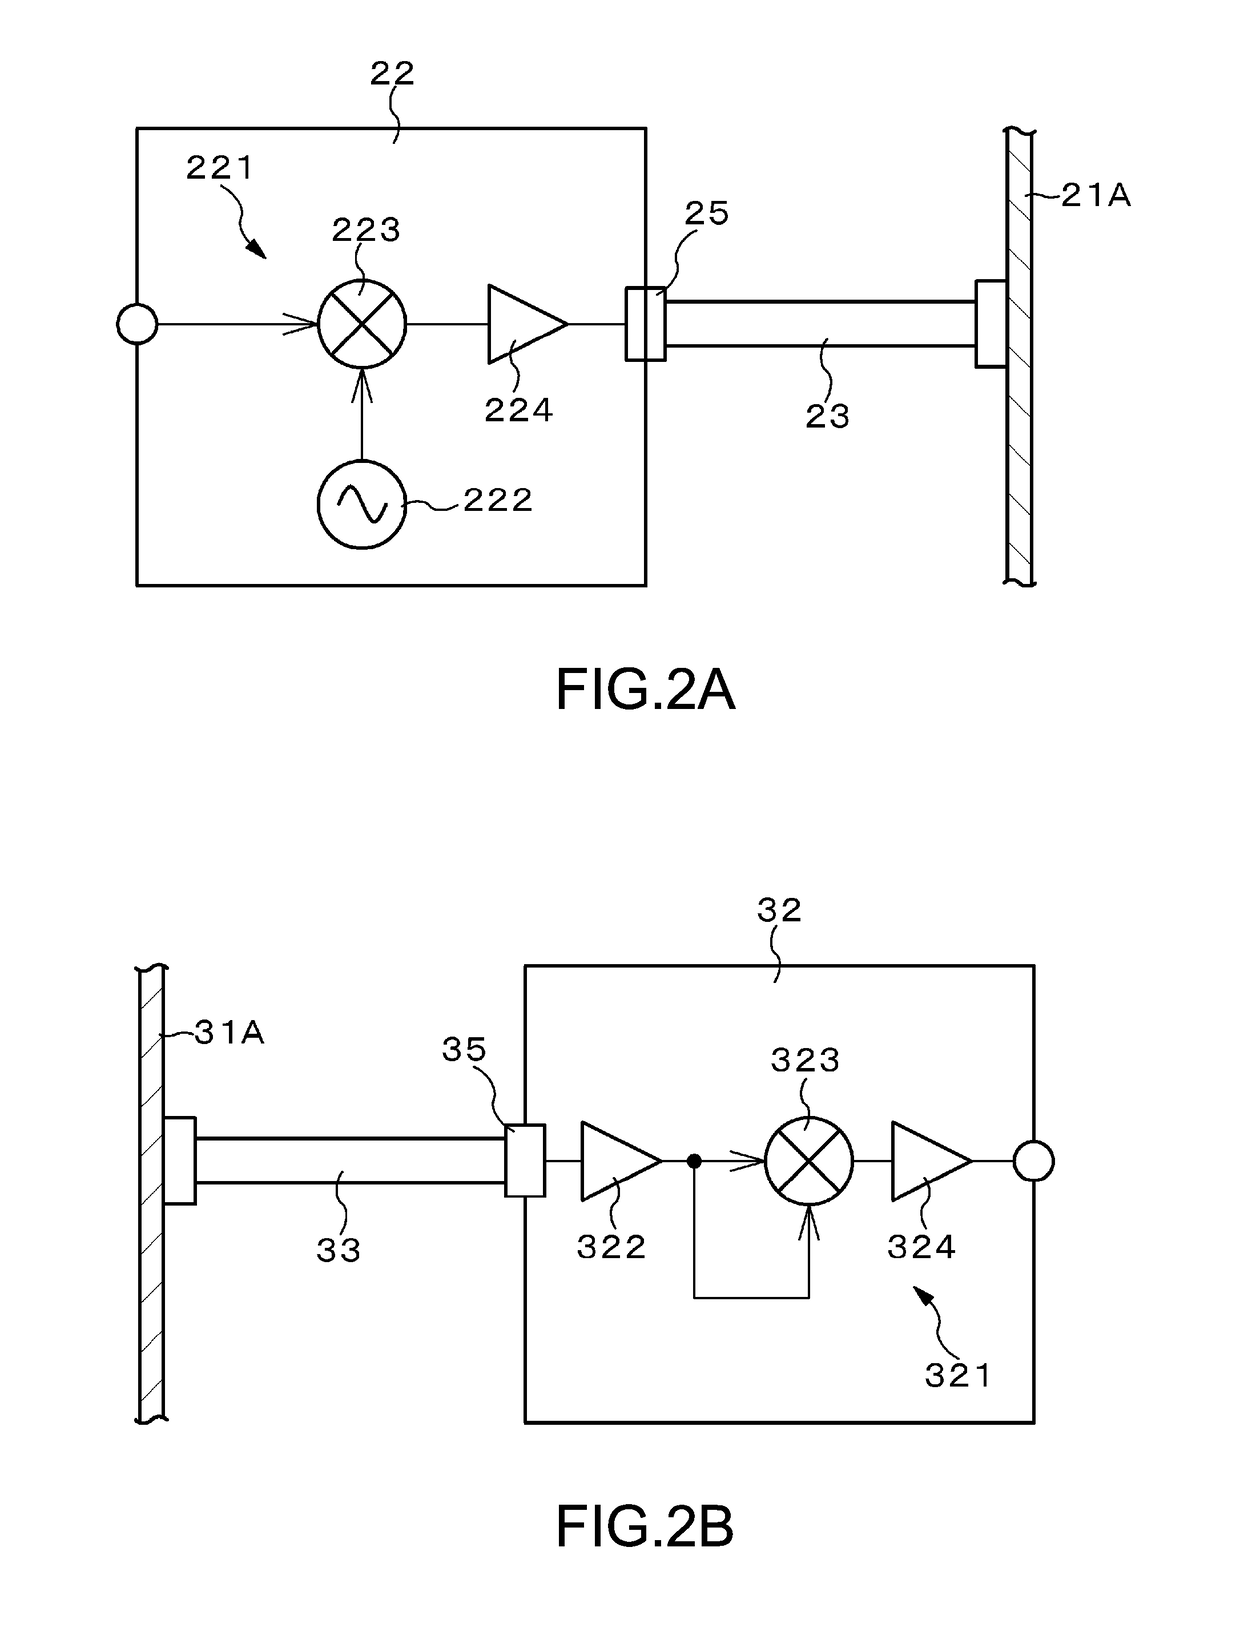 Communication system comprising a connector having first and second waveguides disposed in proximity to each other for coupling millimeter-wave data signals